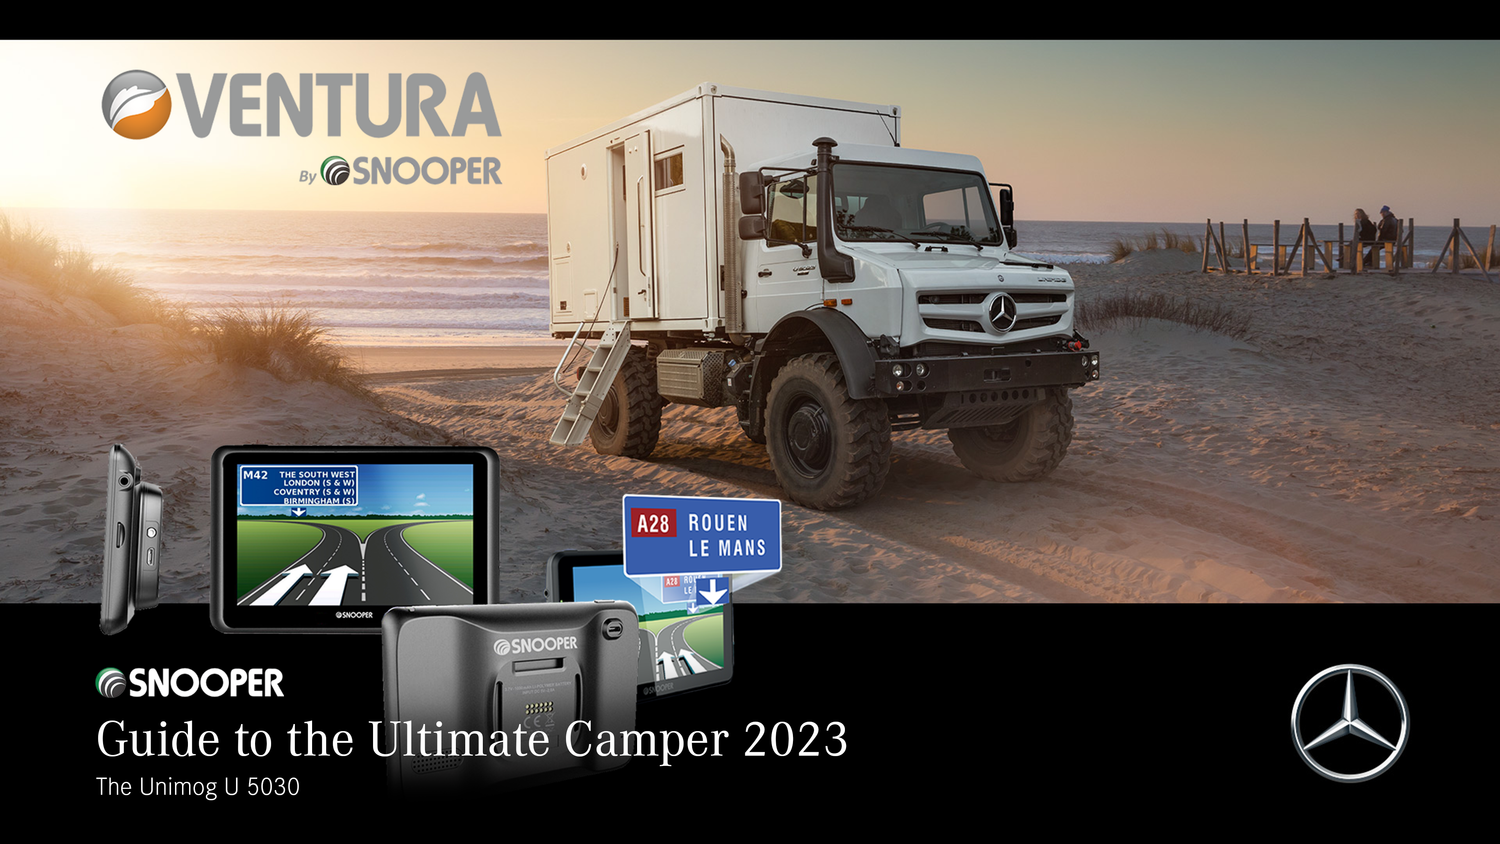 Snooper’s guide to the Ultimate Camper 2023